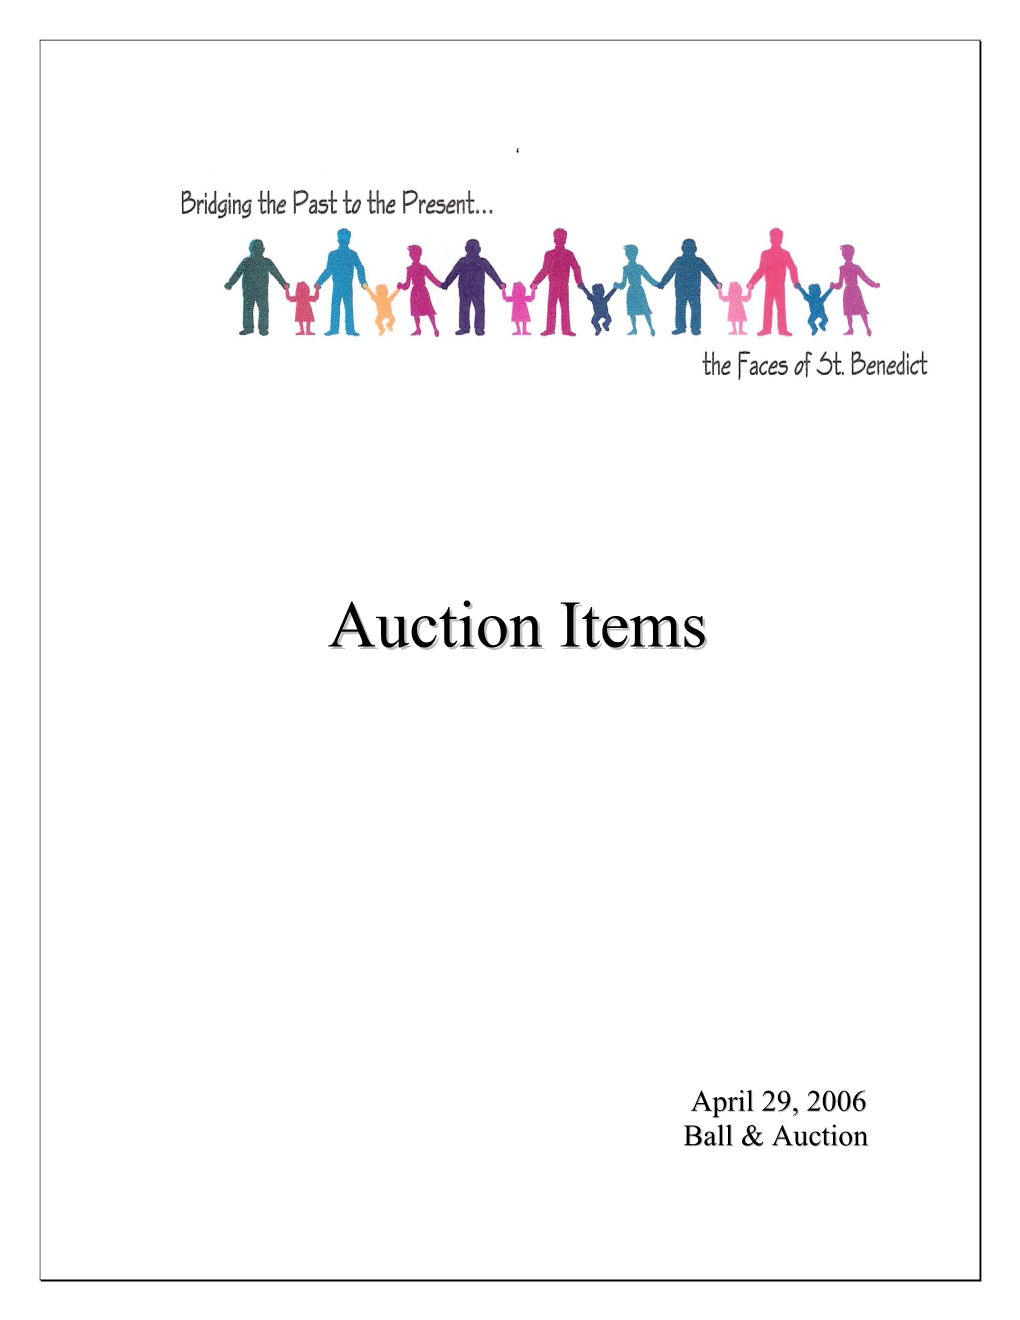 Live and Silent Auction Rules